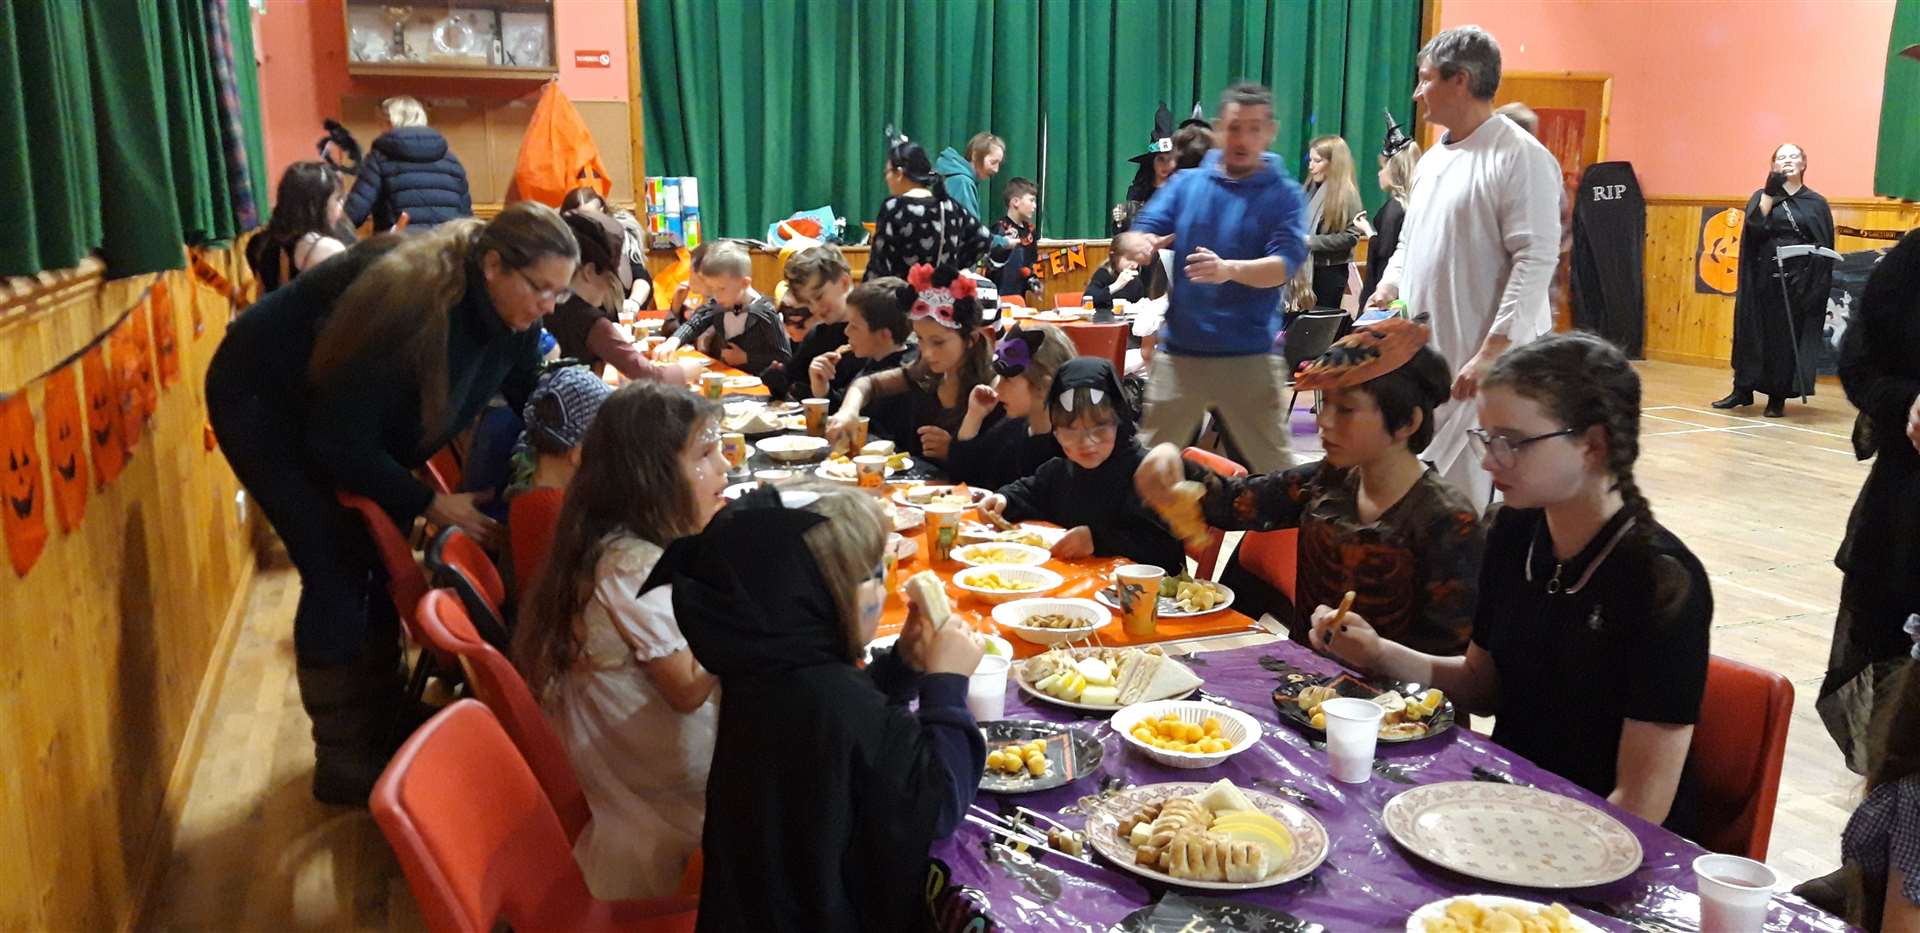 More than 30 children attended the Halloween party and enjoyed a slap-up afternoon tea.